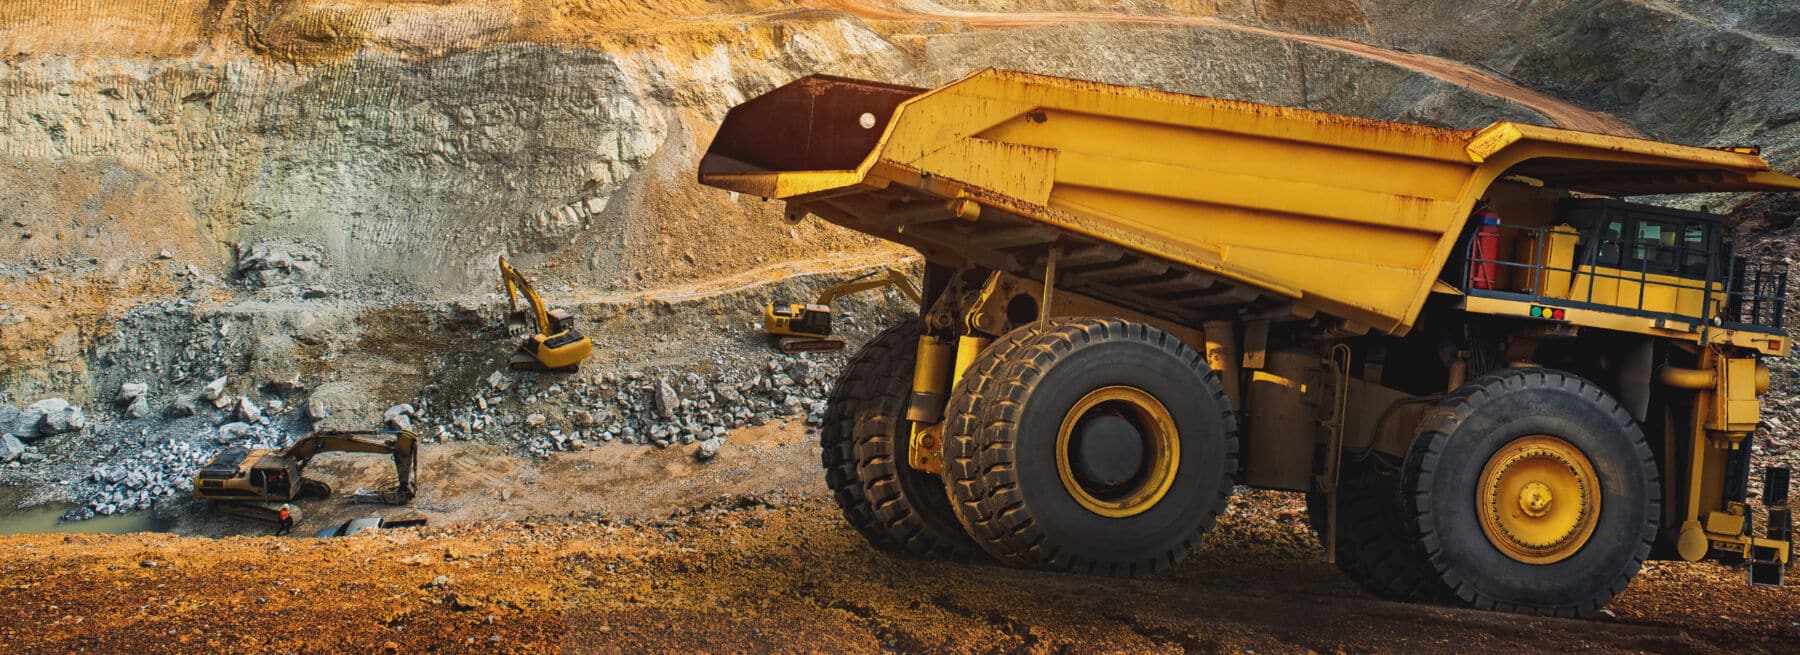 safety and threats in the mining industry